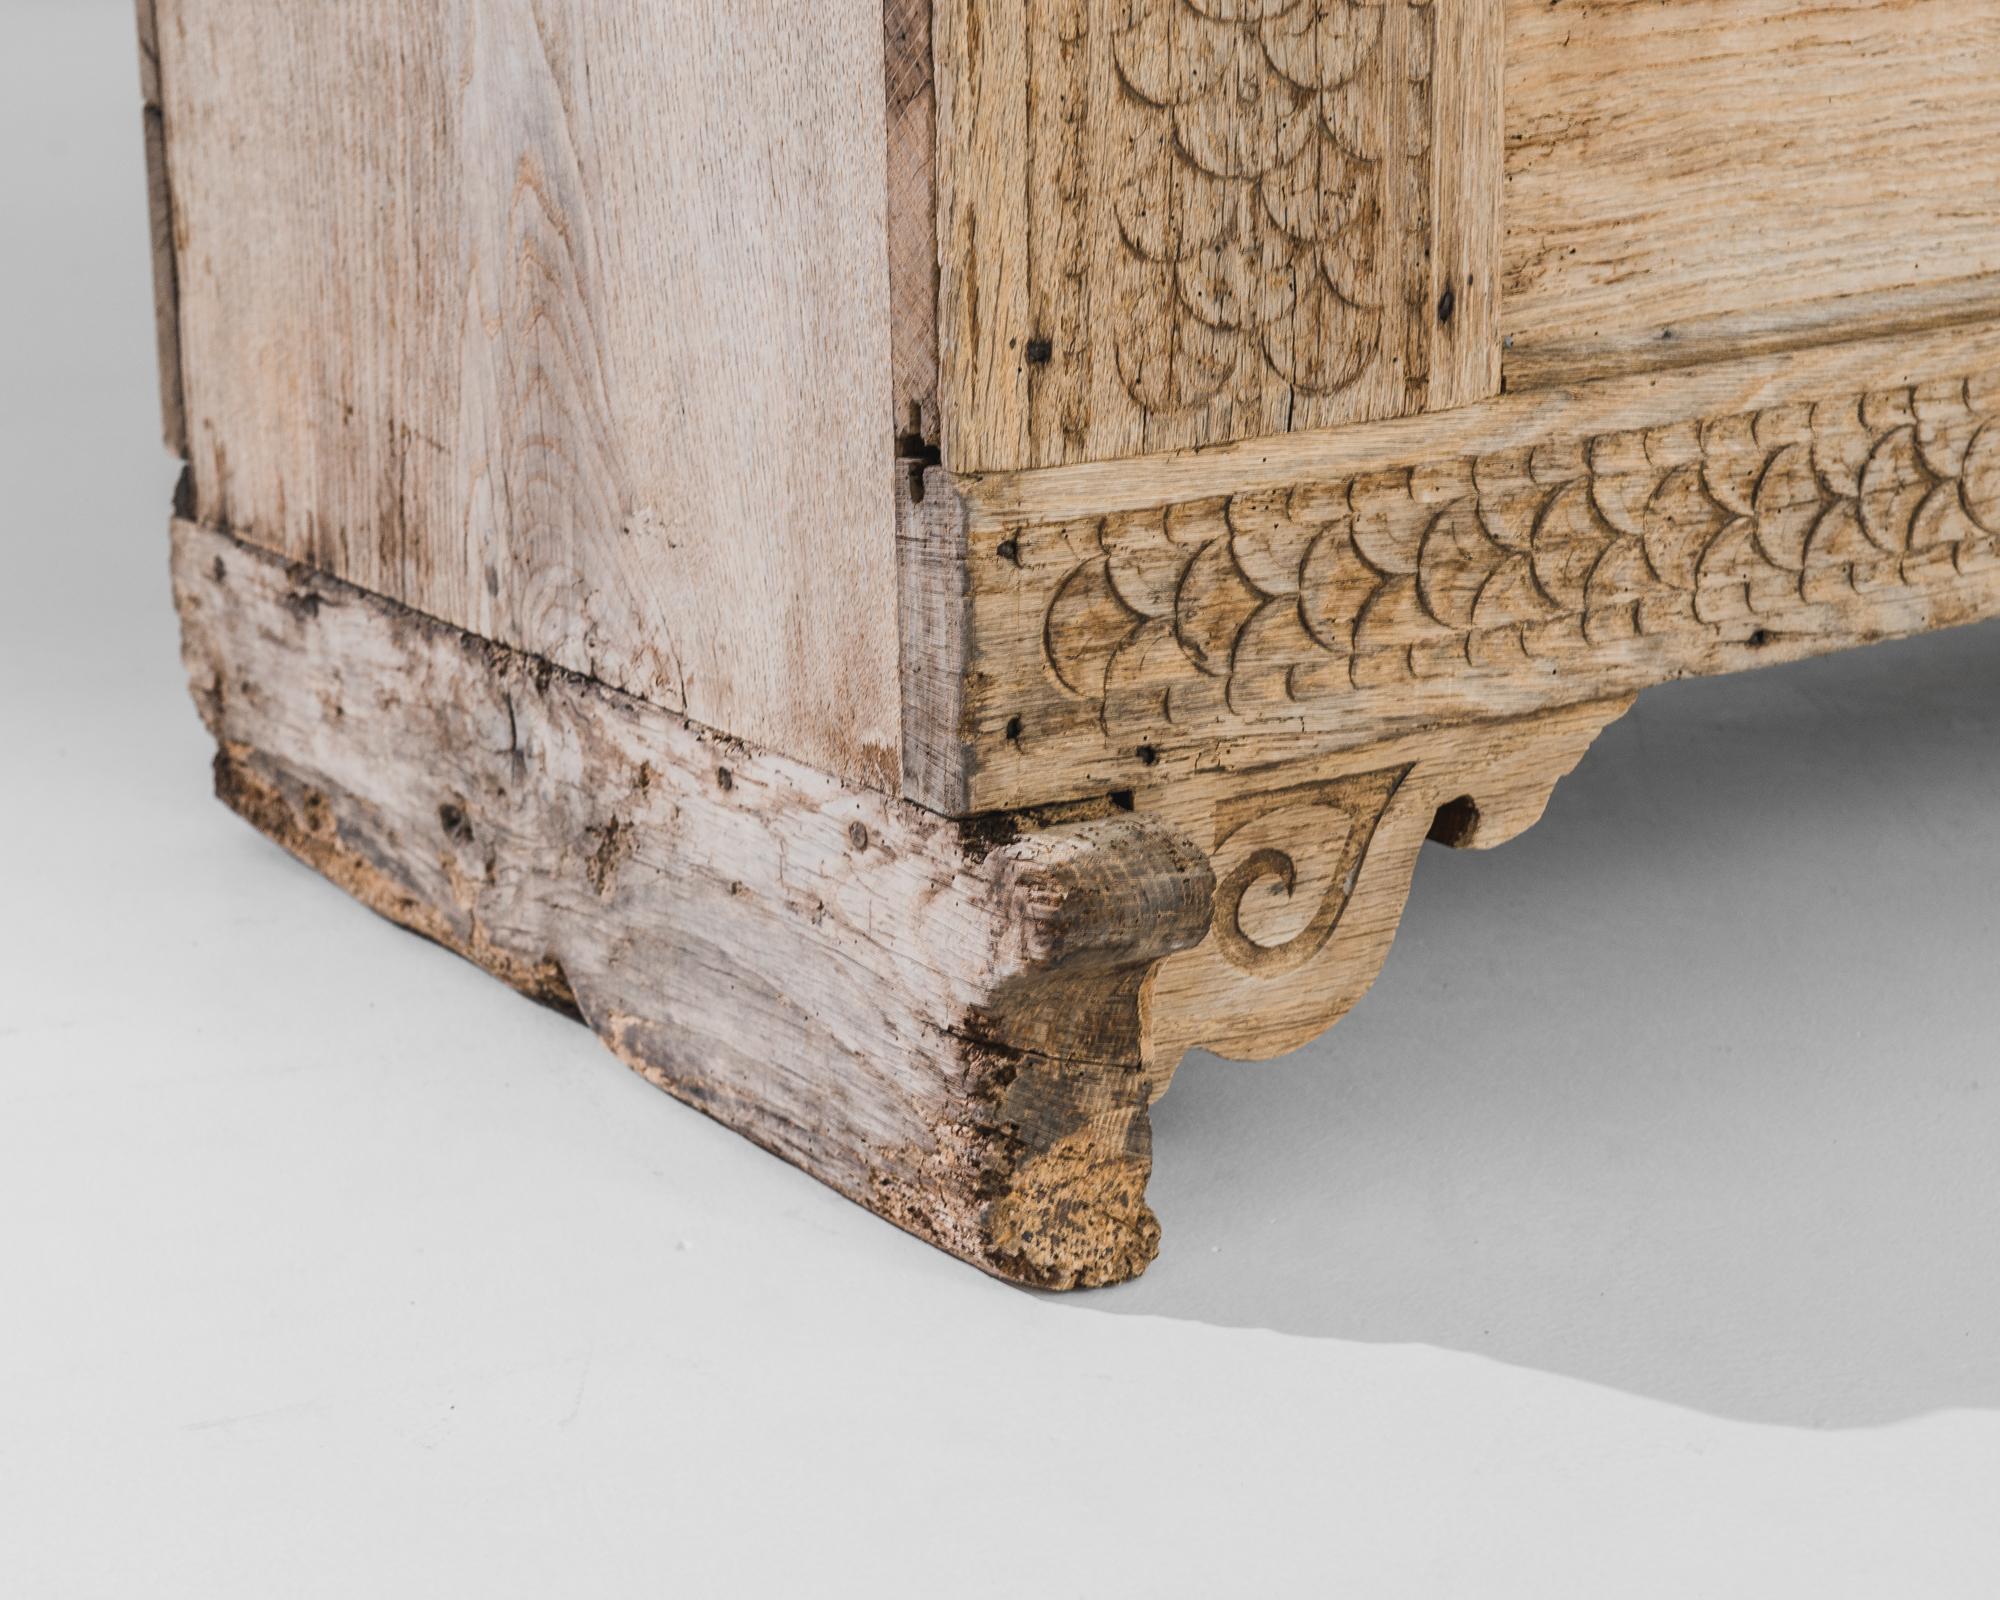 Experience the allure of 19th-century Germany with this provincial wooden trunk. The intricate carvings adorning the charming case weave delicate floral patterns, showcasing the fine craftsmanship of the era. Raised on feet, the trunk features an